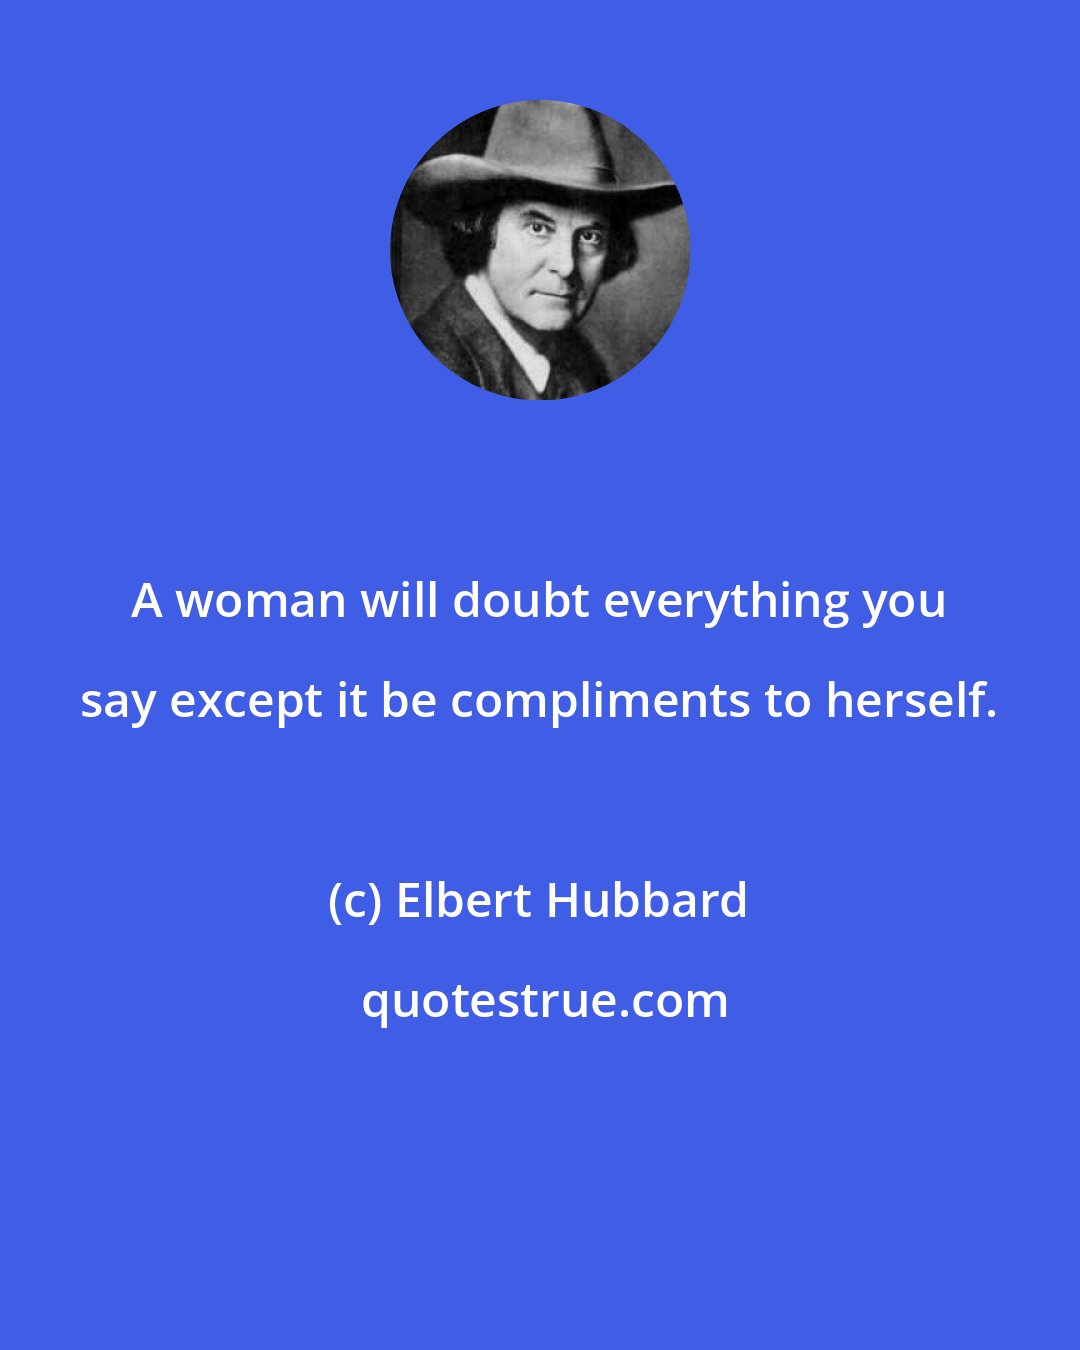 Elbert Hubbard: A woman will doubt everything you say except it be compliments to herself.